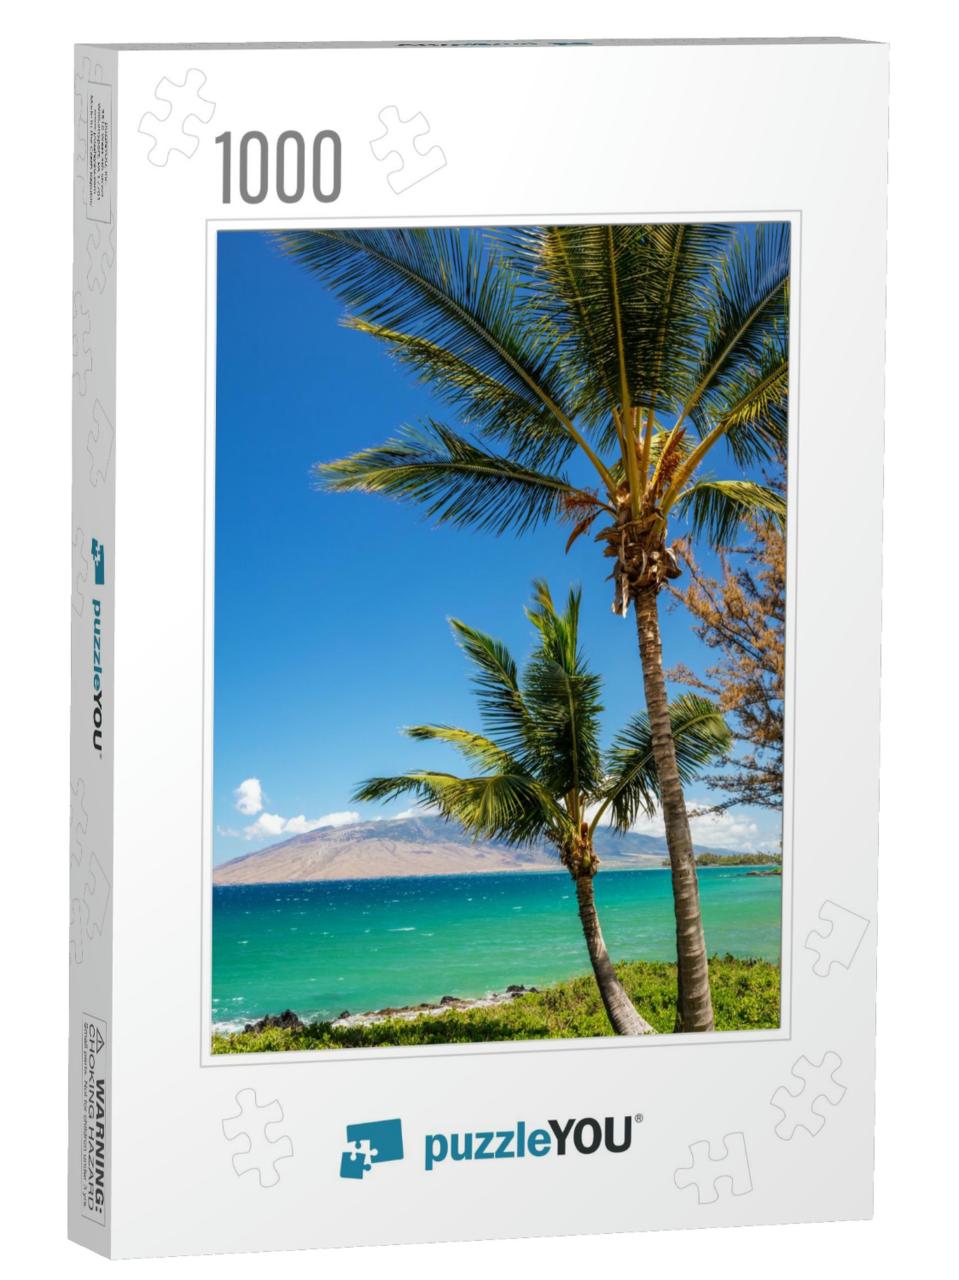 Palm Trees & Turquoise Sea on Maui, Hawaii... Jigsaw Puzzle with 1000 pieces